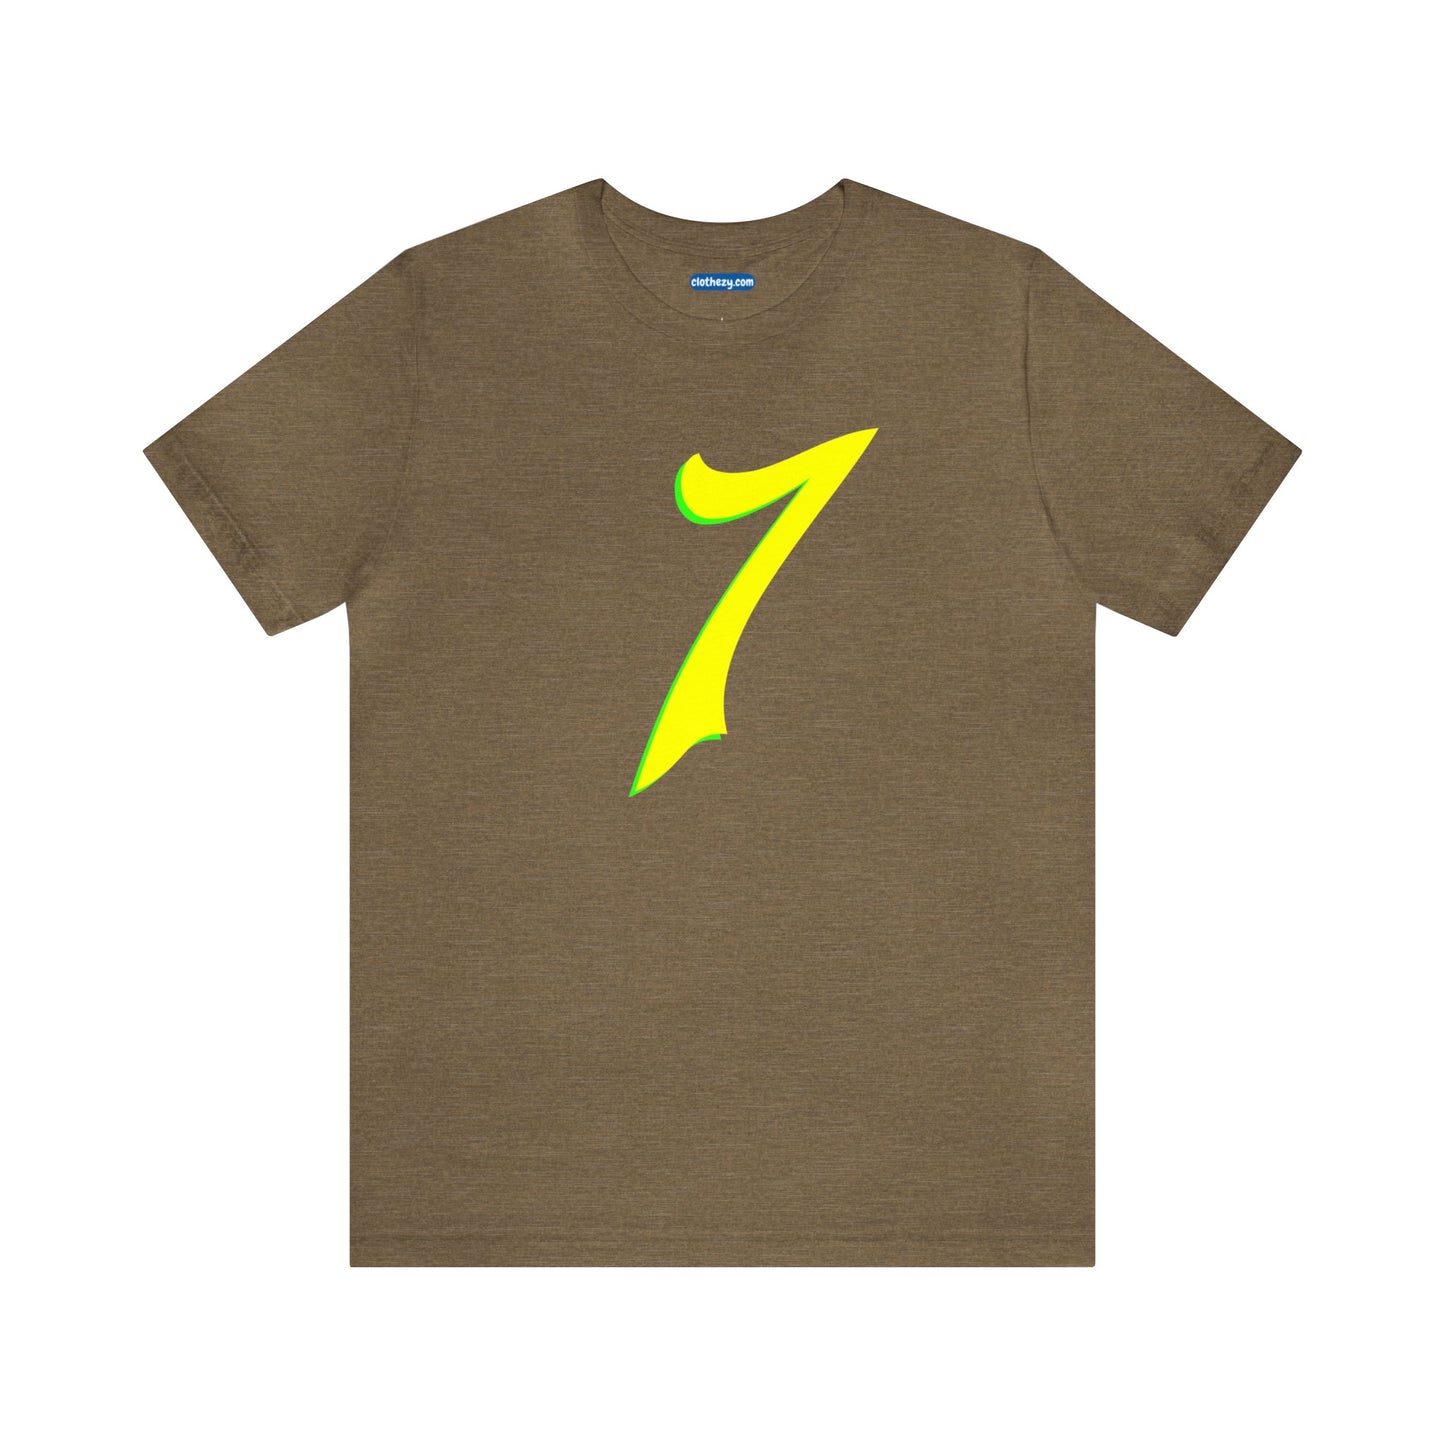 Number 7 Design - Soft Cotton Tee for birthdays and celebrations, Gift for friends and family, Multiple Options by clothezy.com in Olive Heather Size Small - Buy Now